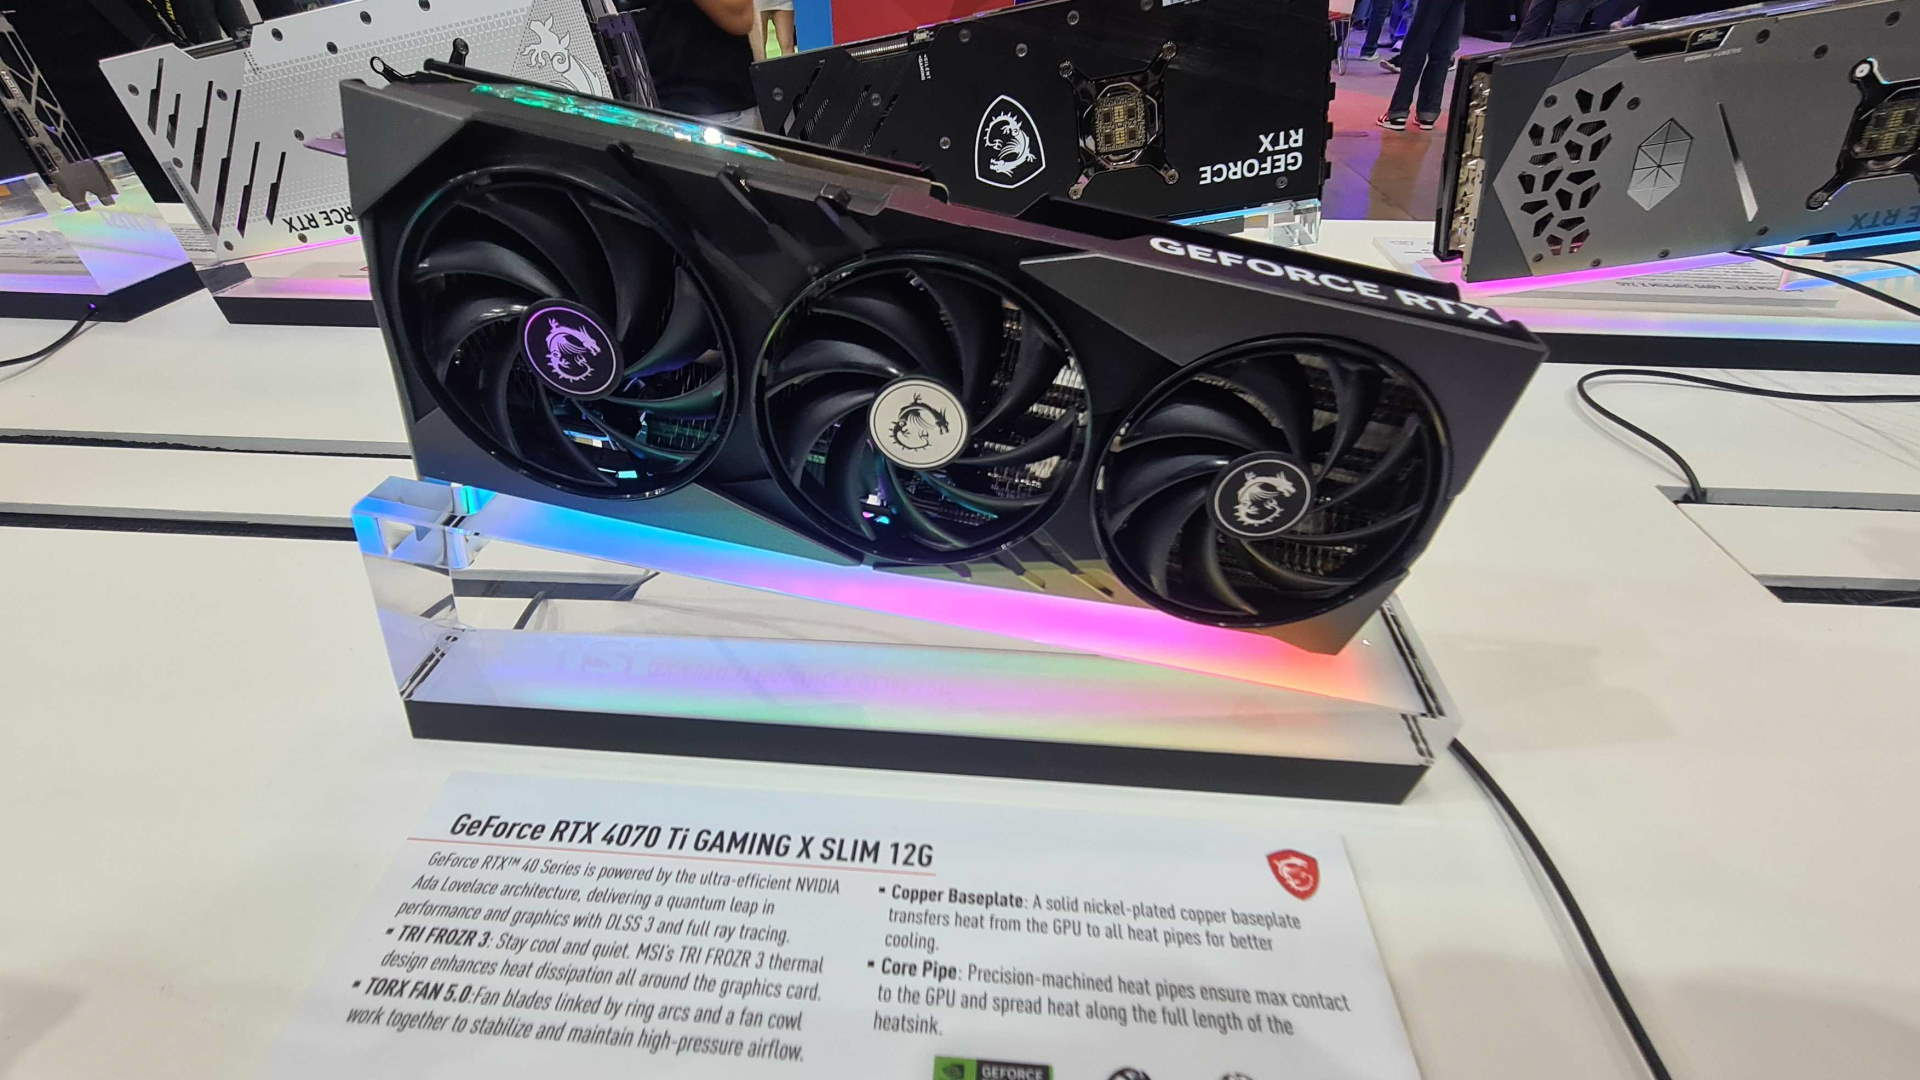 MSI's new line of Gaming X Slim graphics cards has made me irrationally  angry